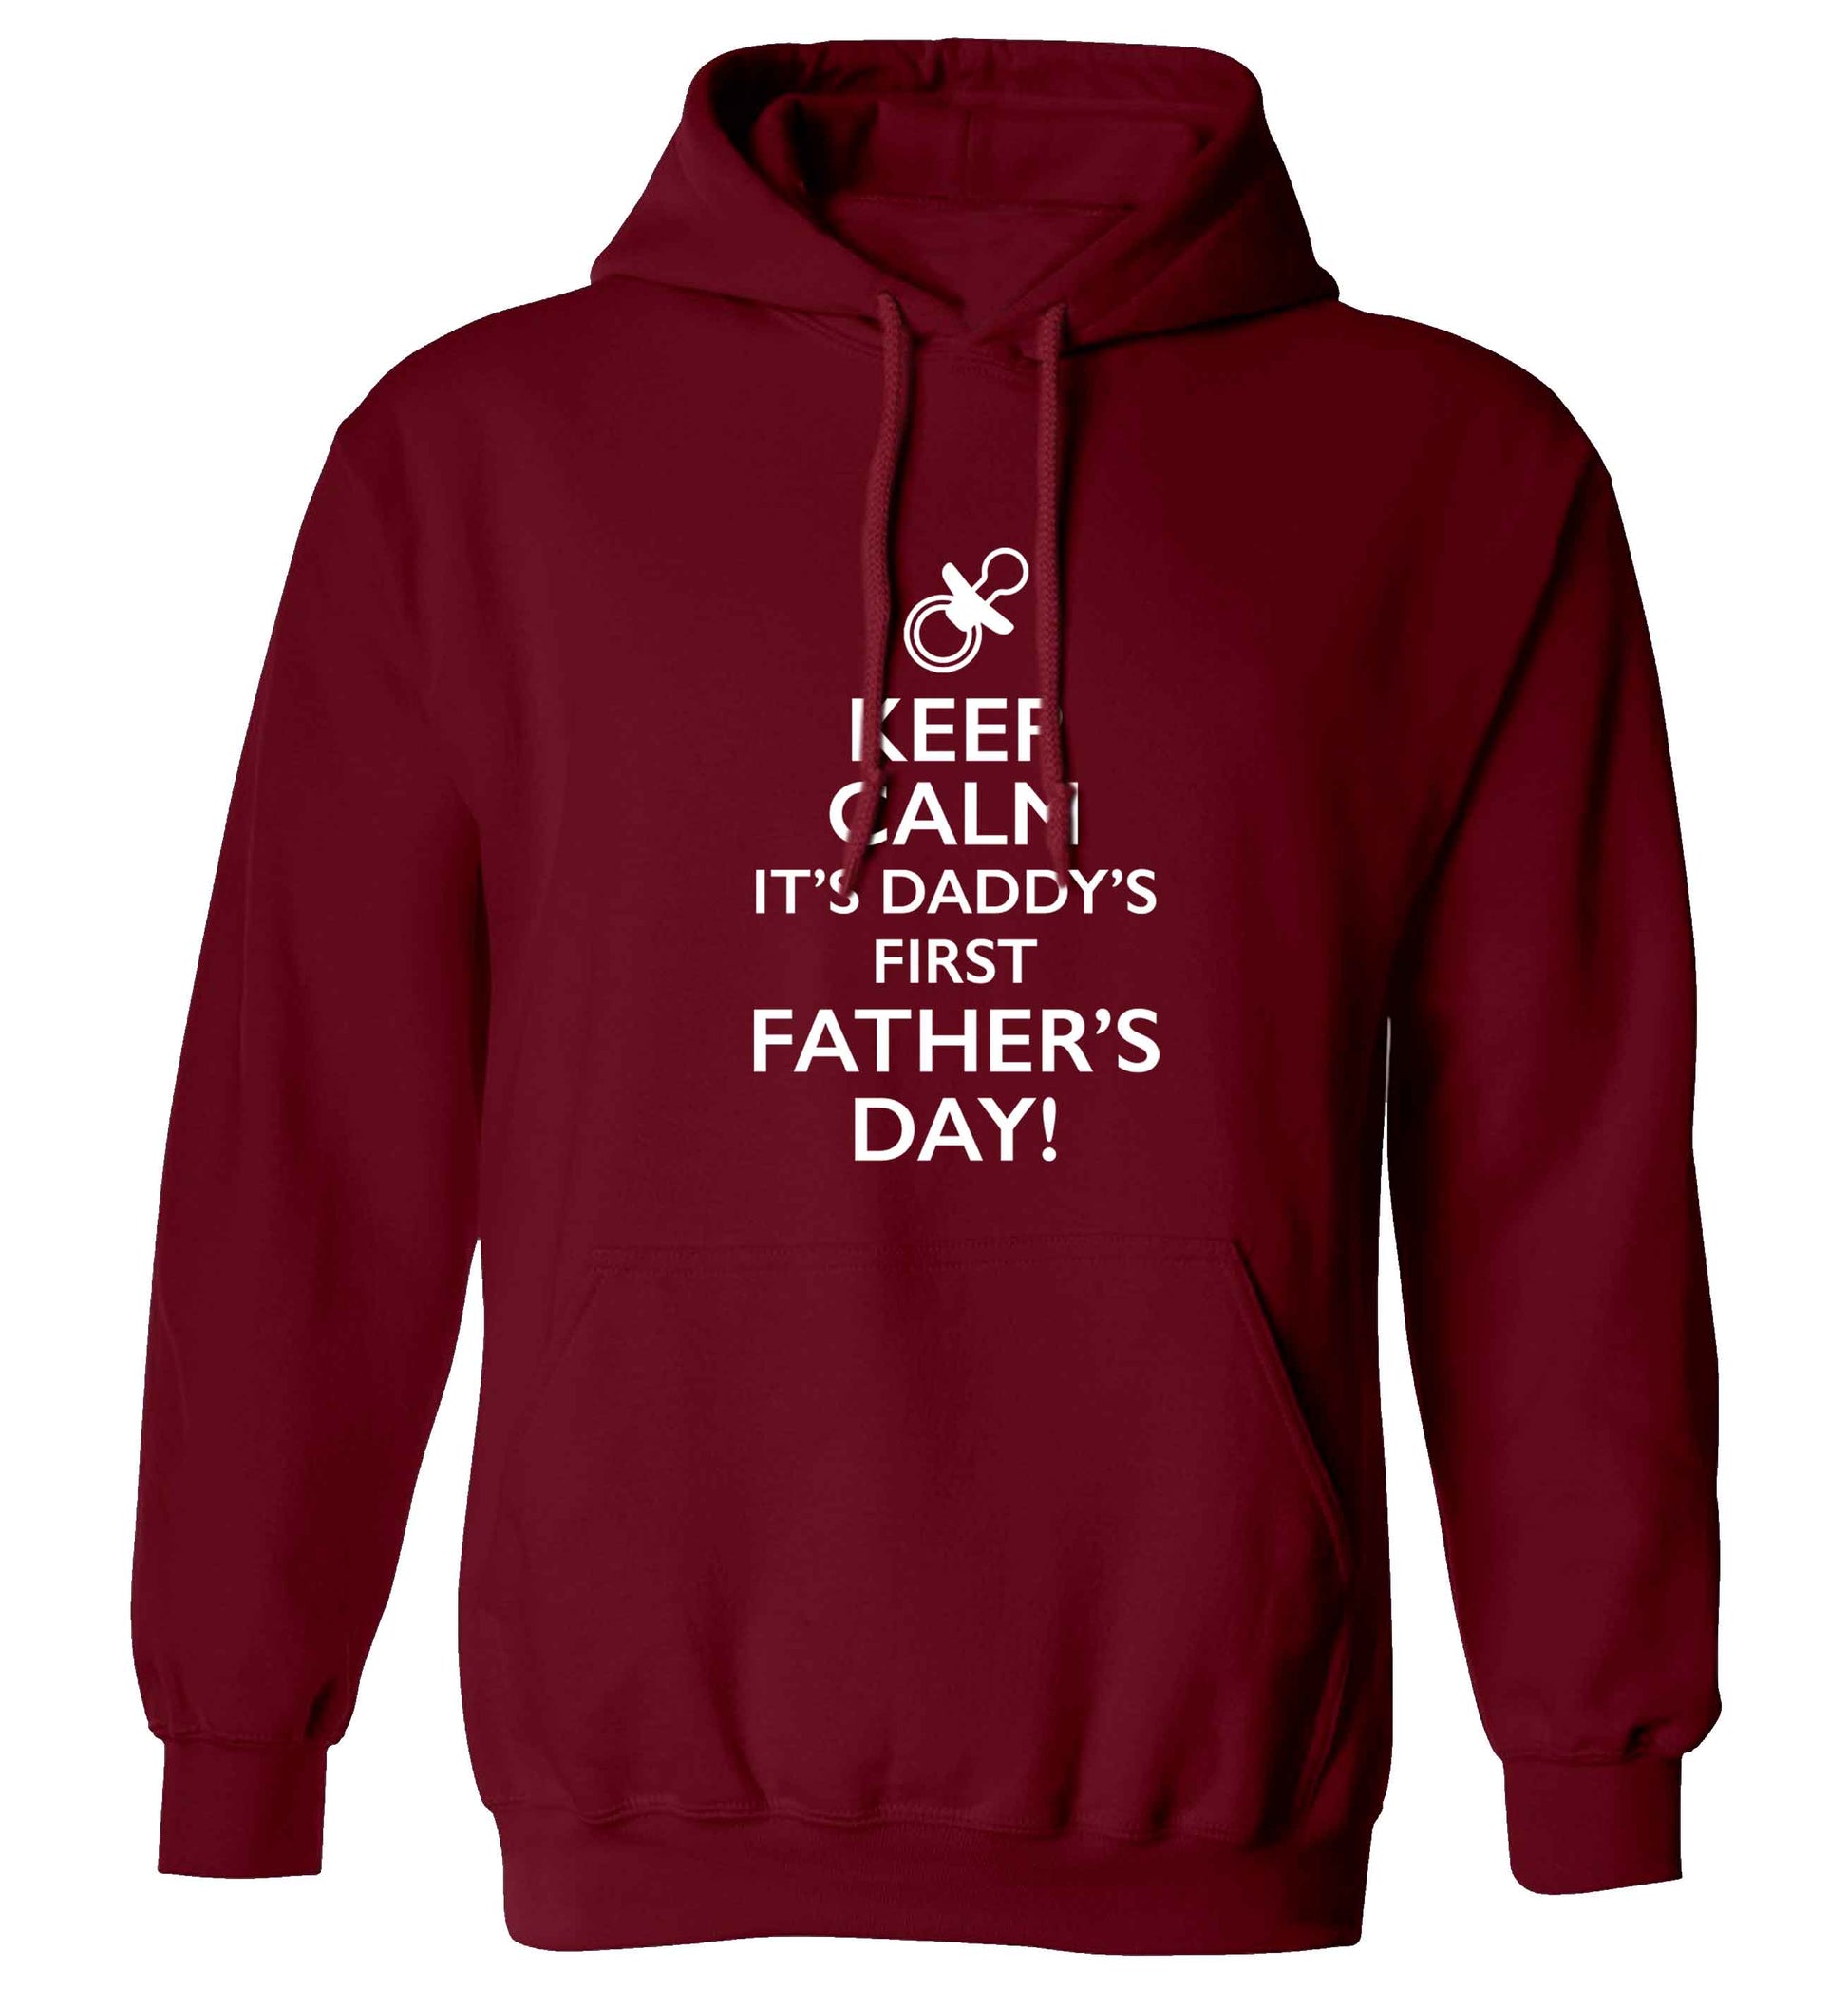 Keep calm it's daddys first father's day adults unisex maroon hoodie 2XL